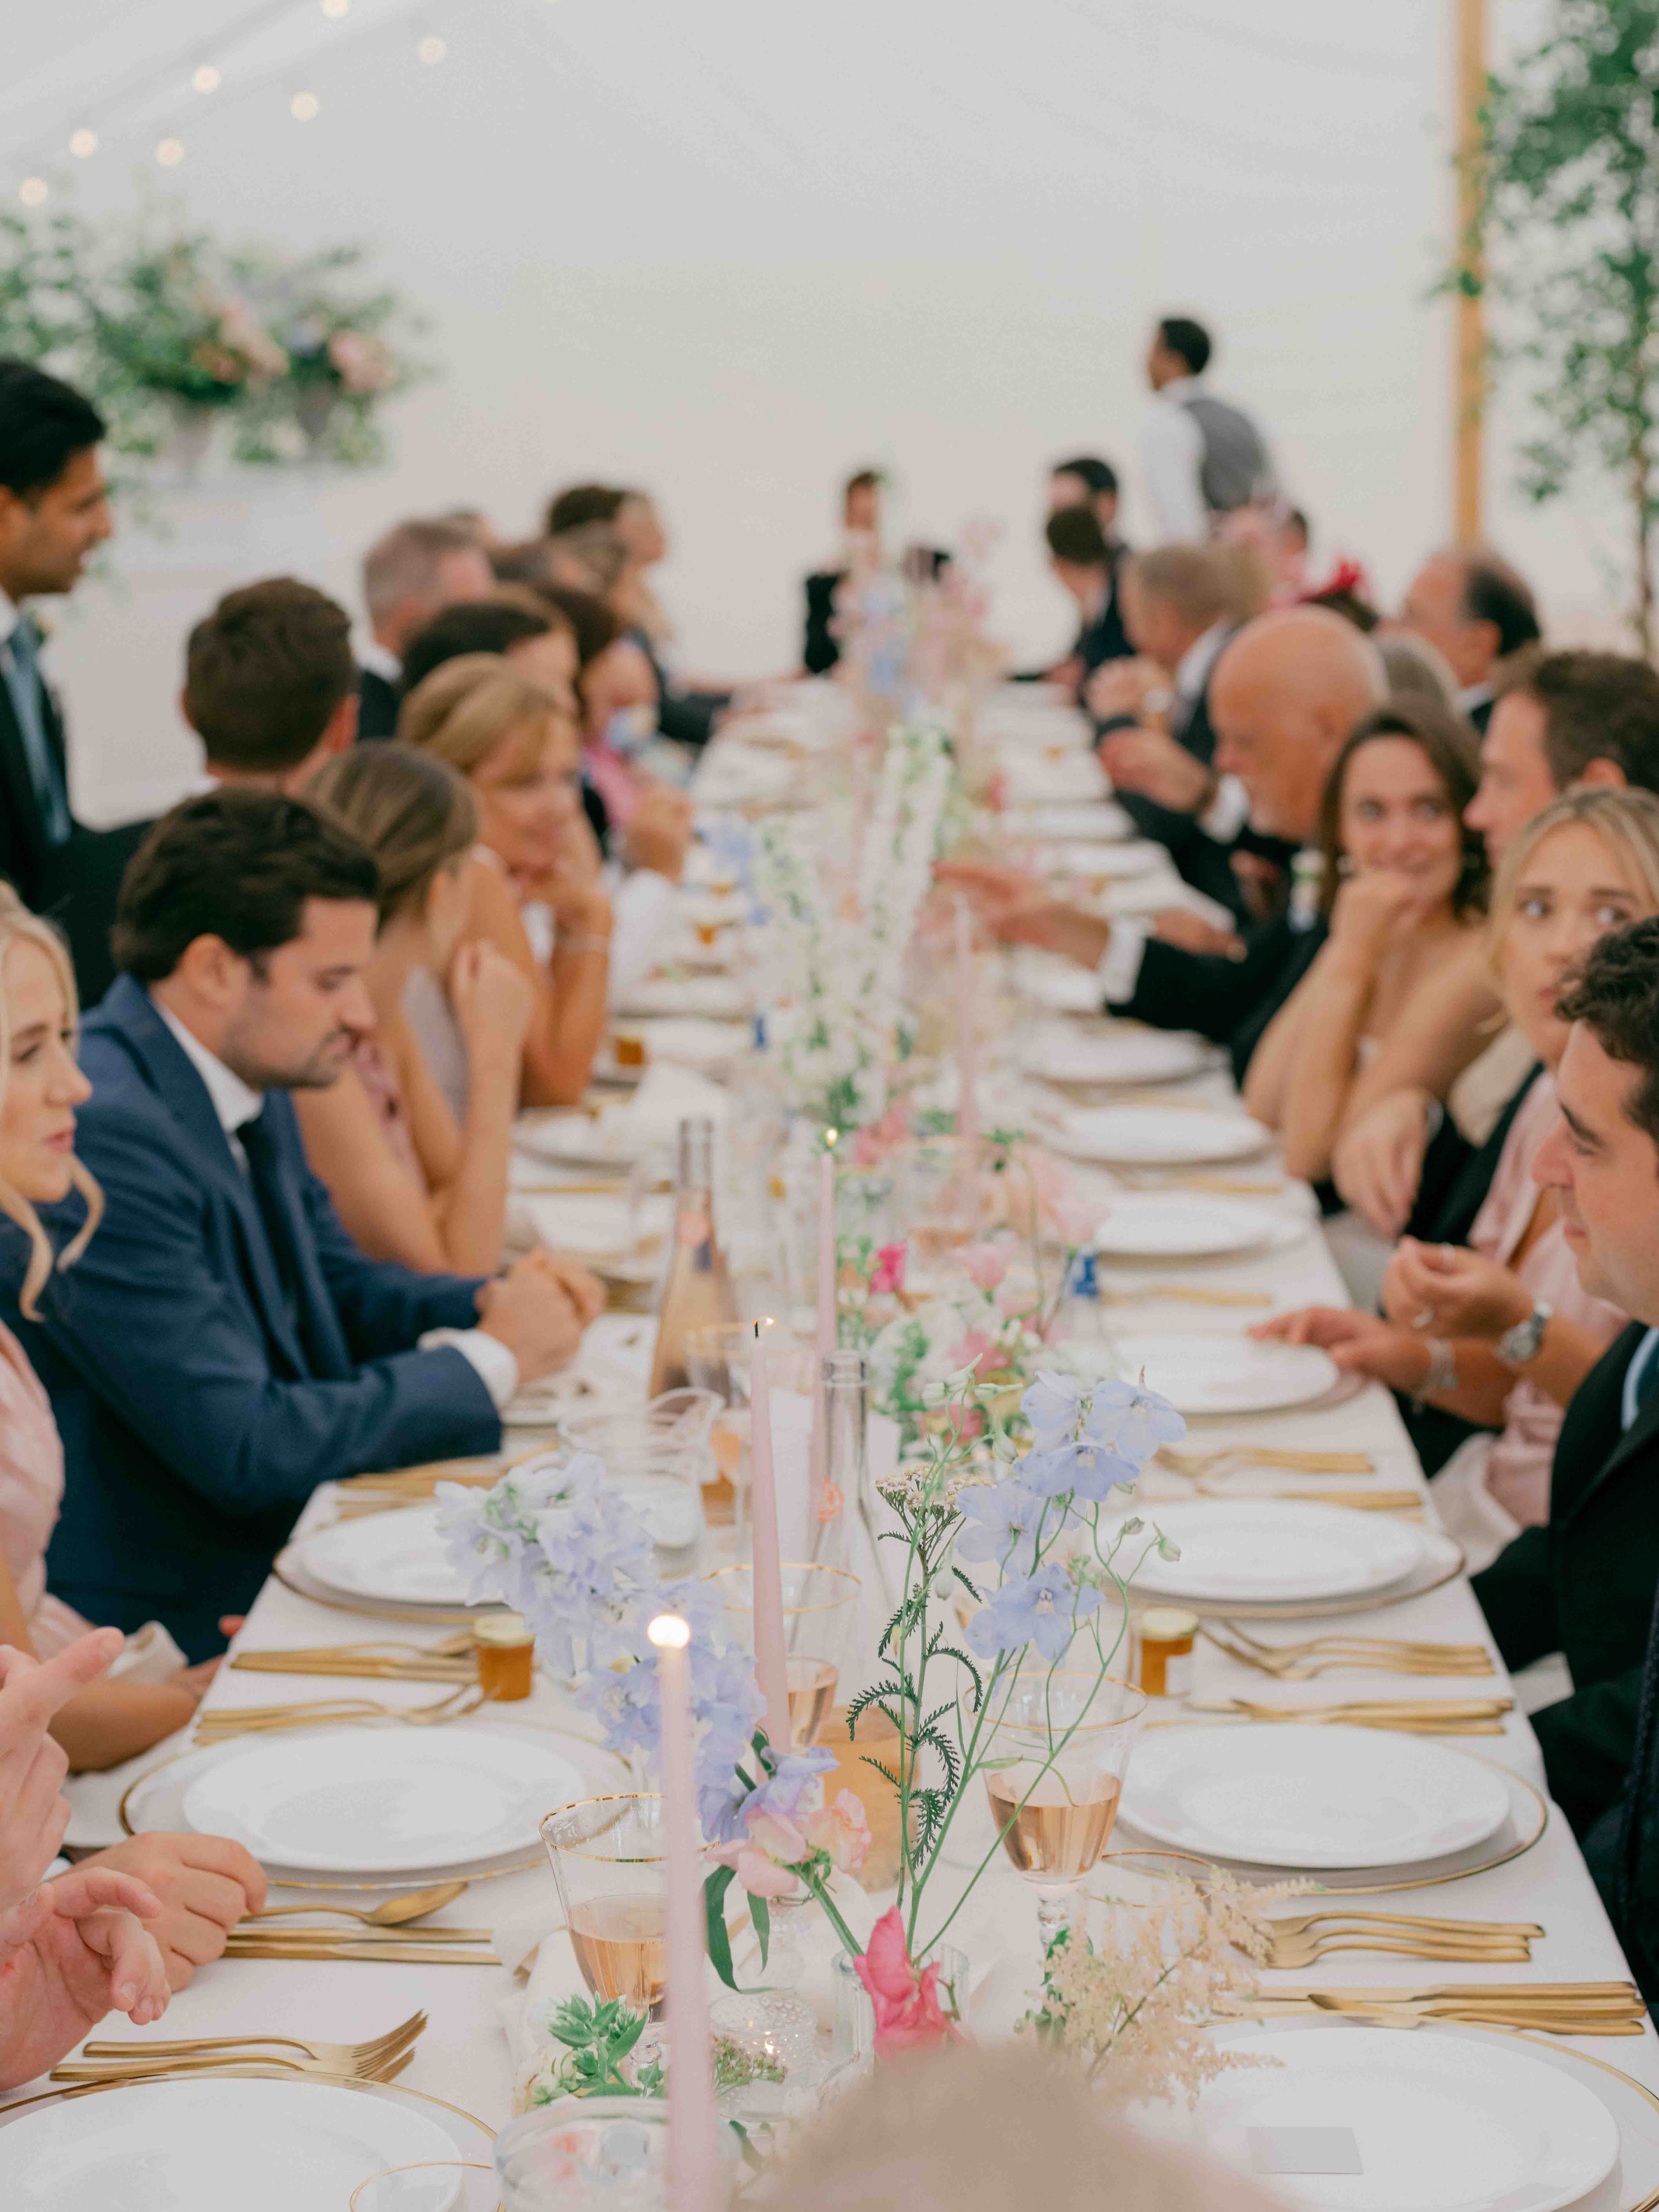  View of guests at wedding table 